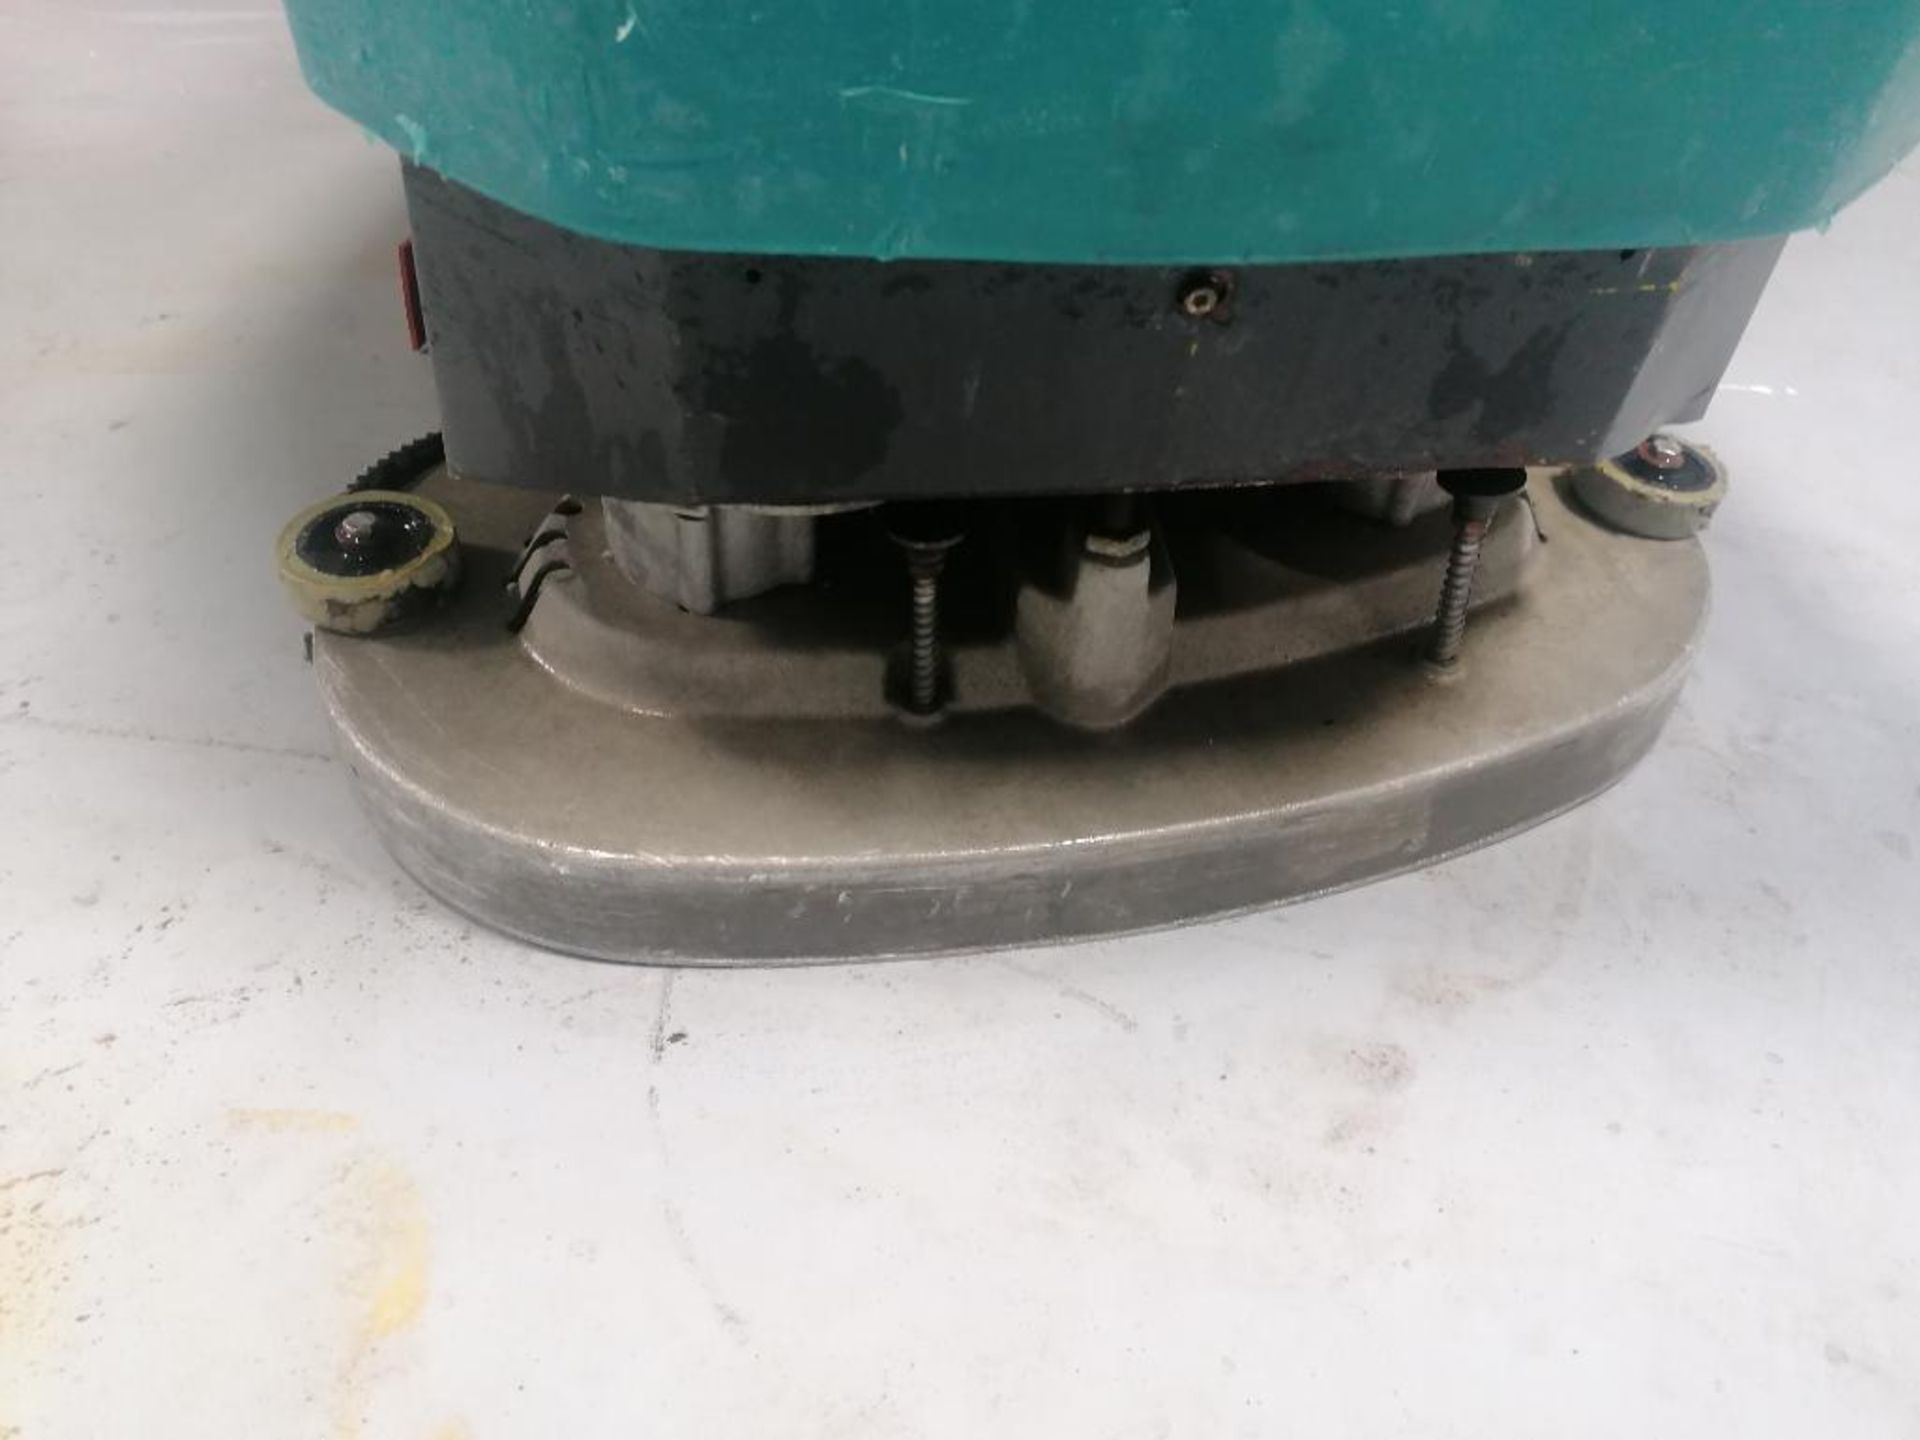 Tennant 5400 Floor Scrubber, Serial #540010203098, 24 Volts. Located in Mt. Pleasant, IA. - Image 17 of 17